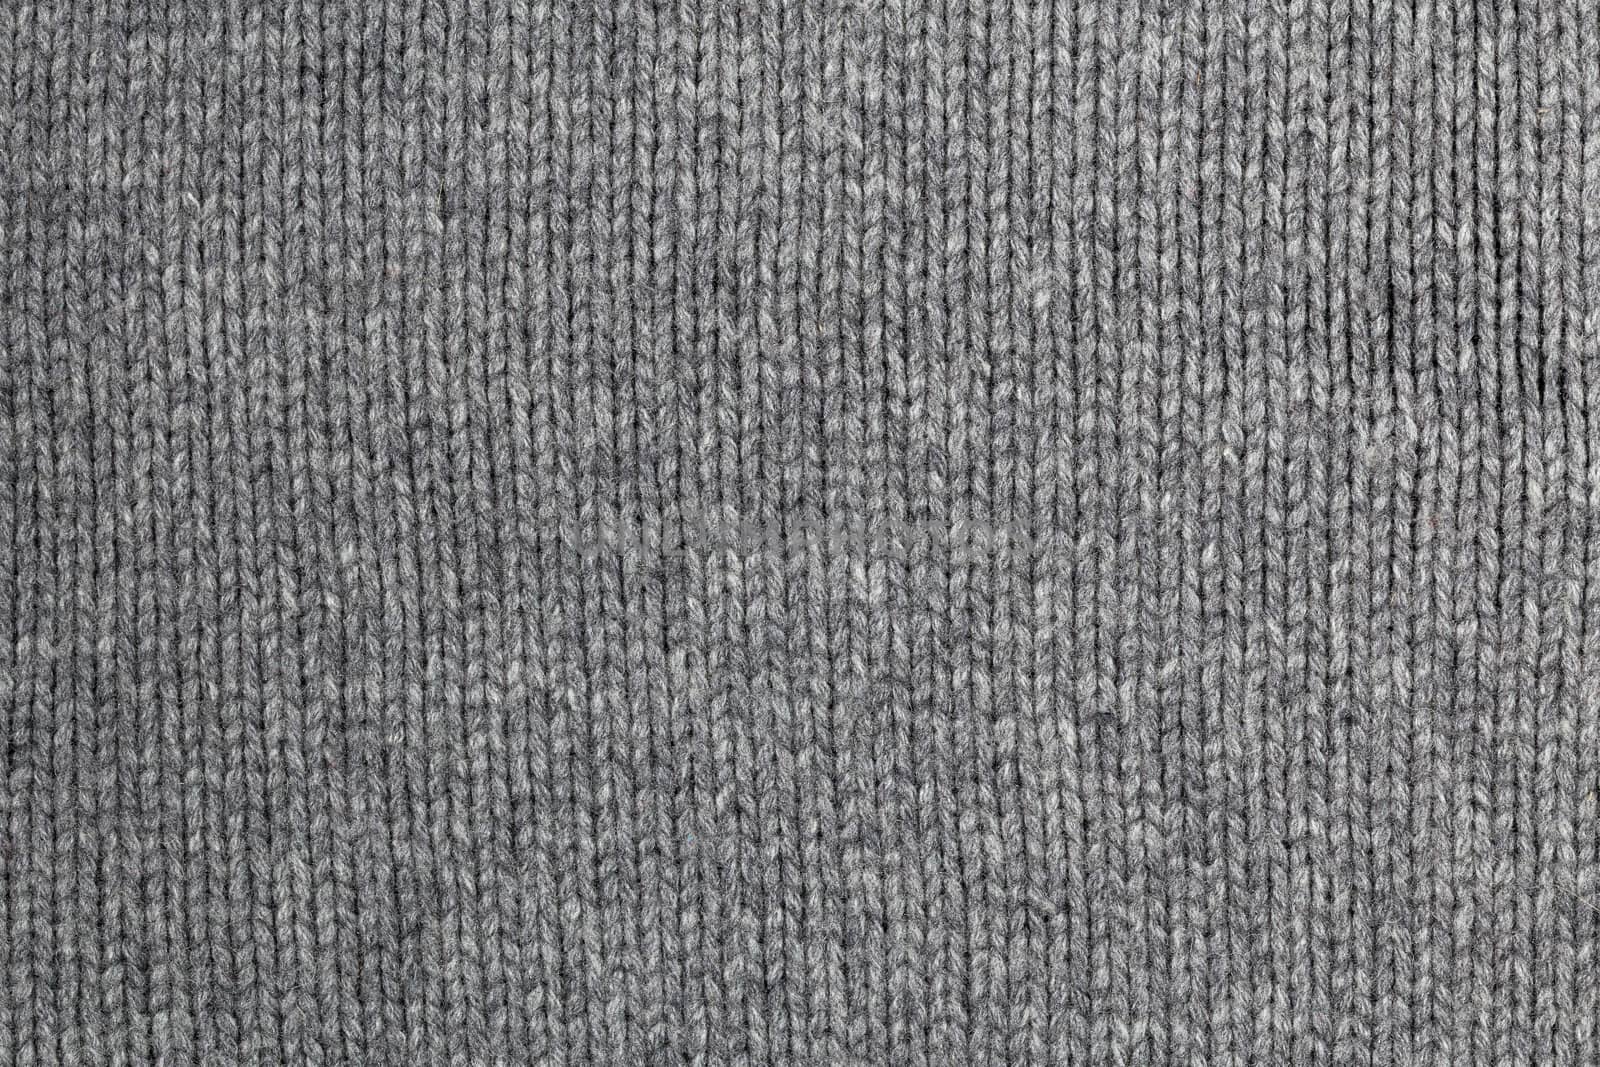 old gray warm wool sweater texture and background by z1b